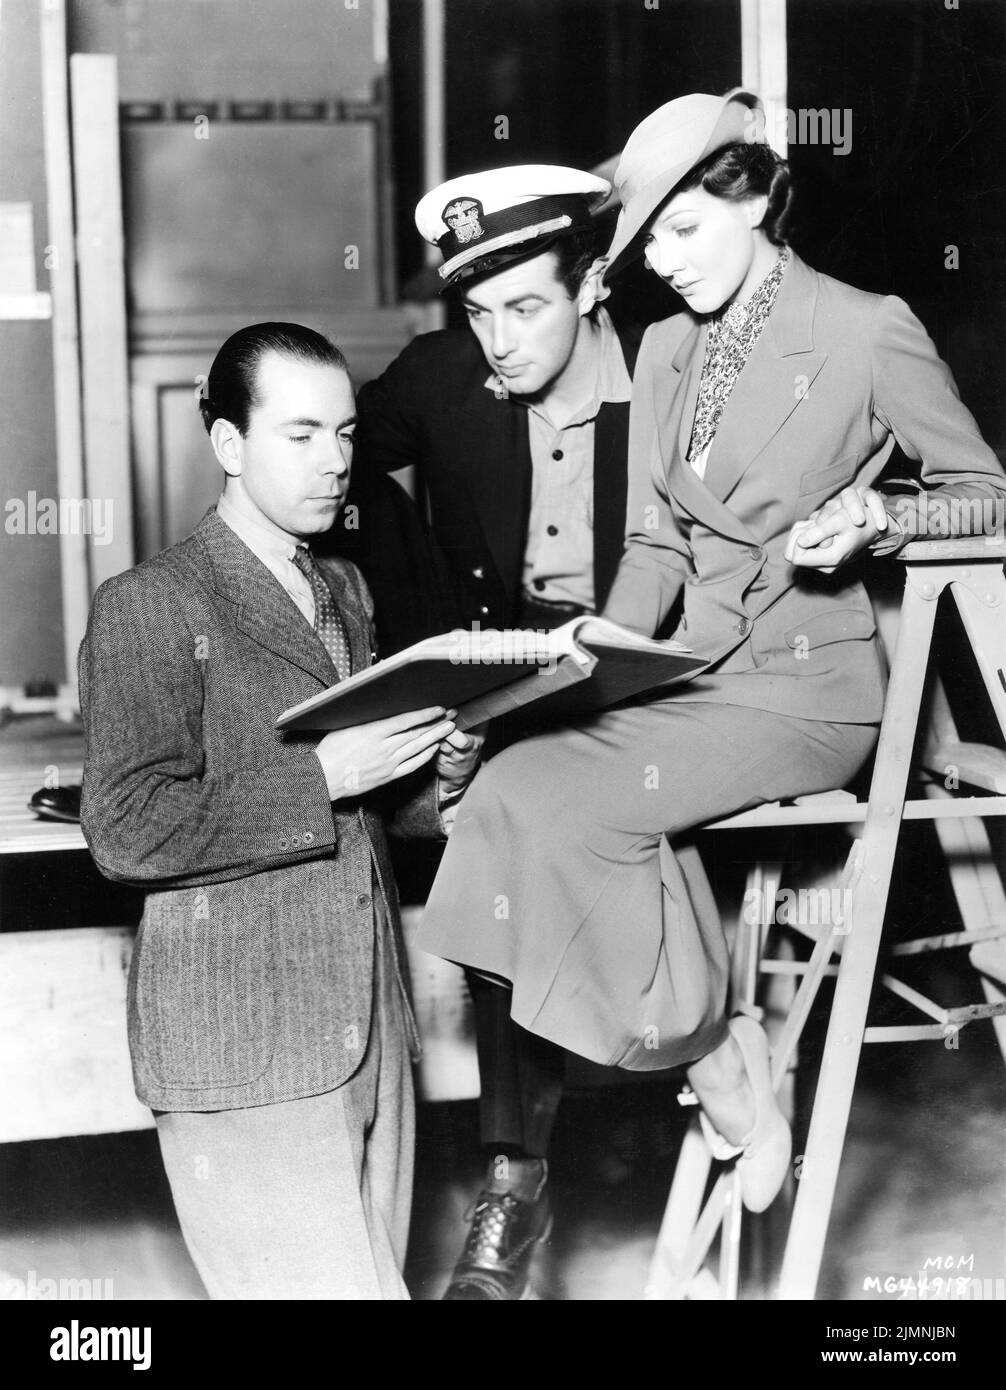 Assistant Director Prince SIGVARD BERNADOTTE, grandson of the King of Sweden, goes over the script with ROBERT TAYLOR and JEAN PARKER on set candid during filming of MURDER IN THE FLEET 1935 director / original story EDWARD SEDGWICK Metro Goldwyn Mayer Stock Photo